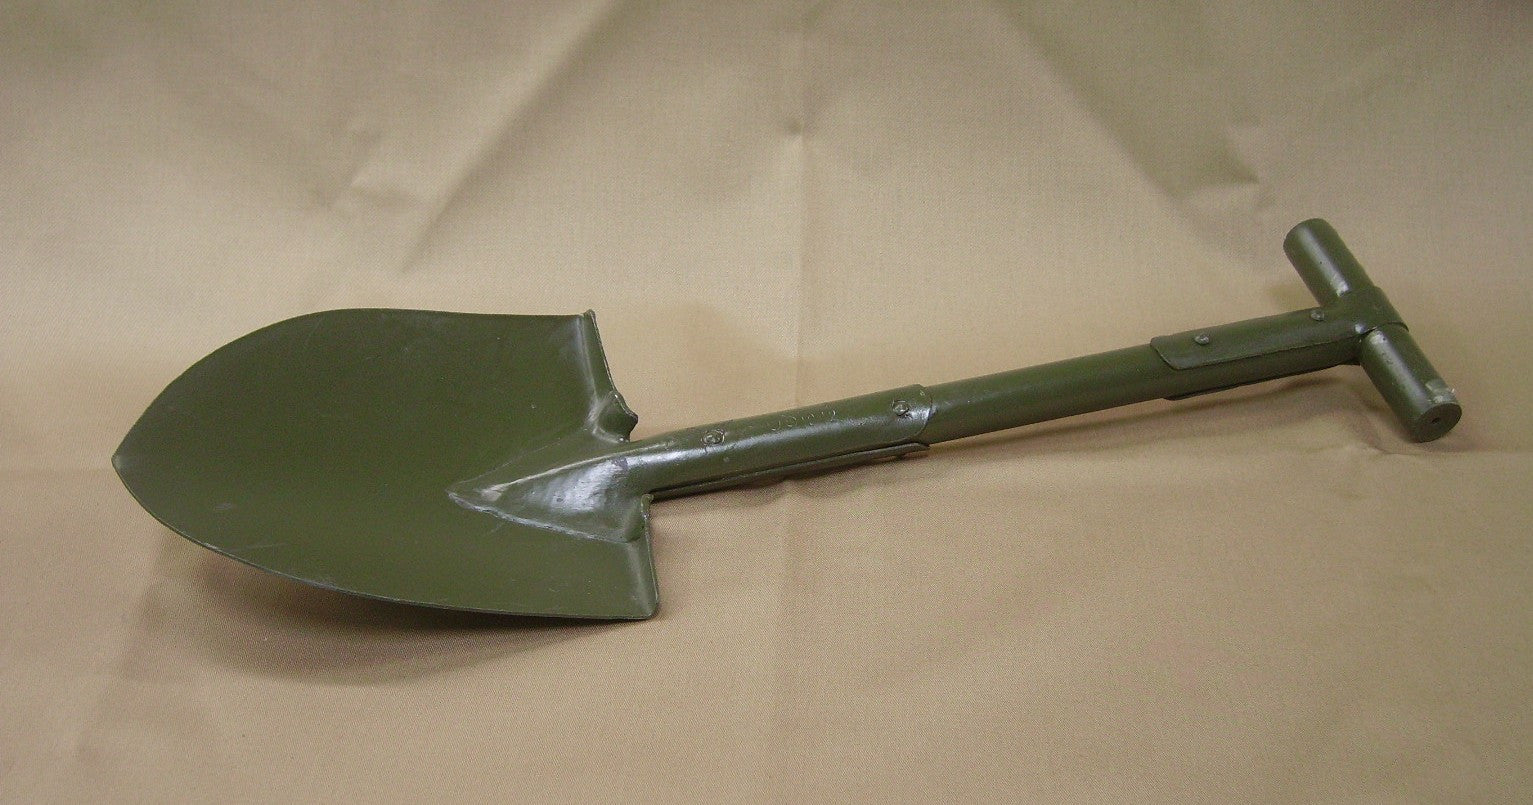 Tool, Intrenching, M1910 (T-handle, Replica)